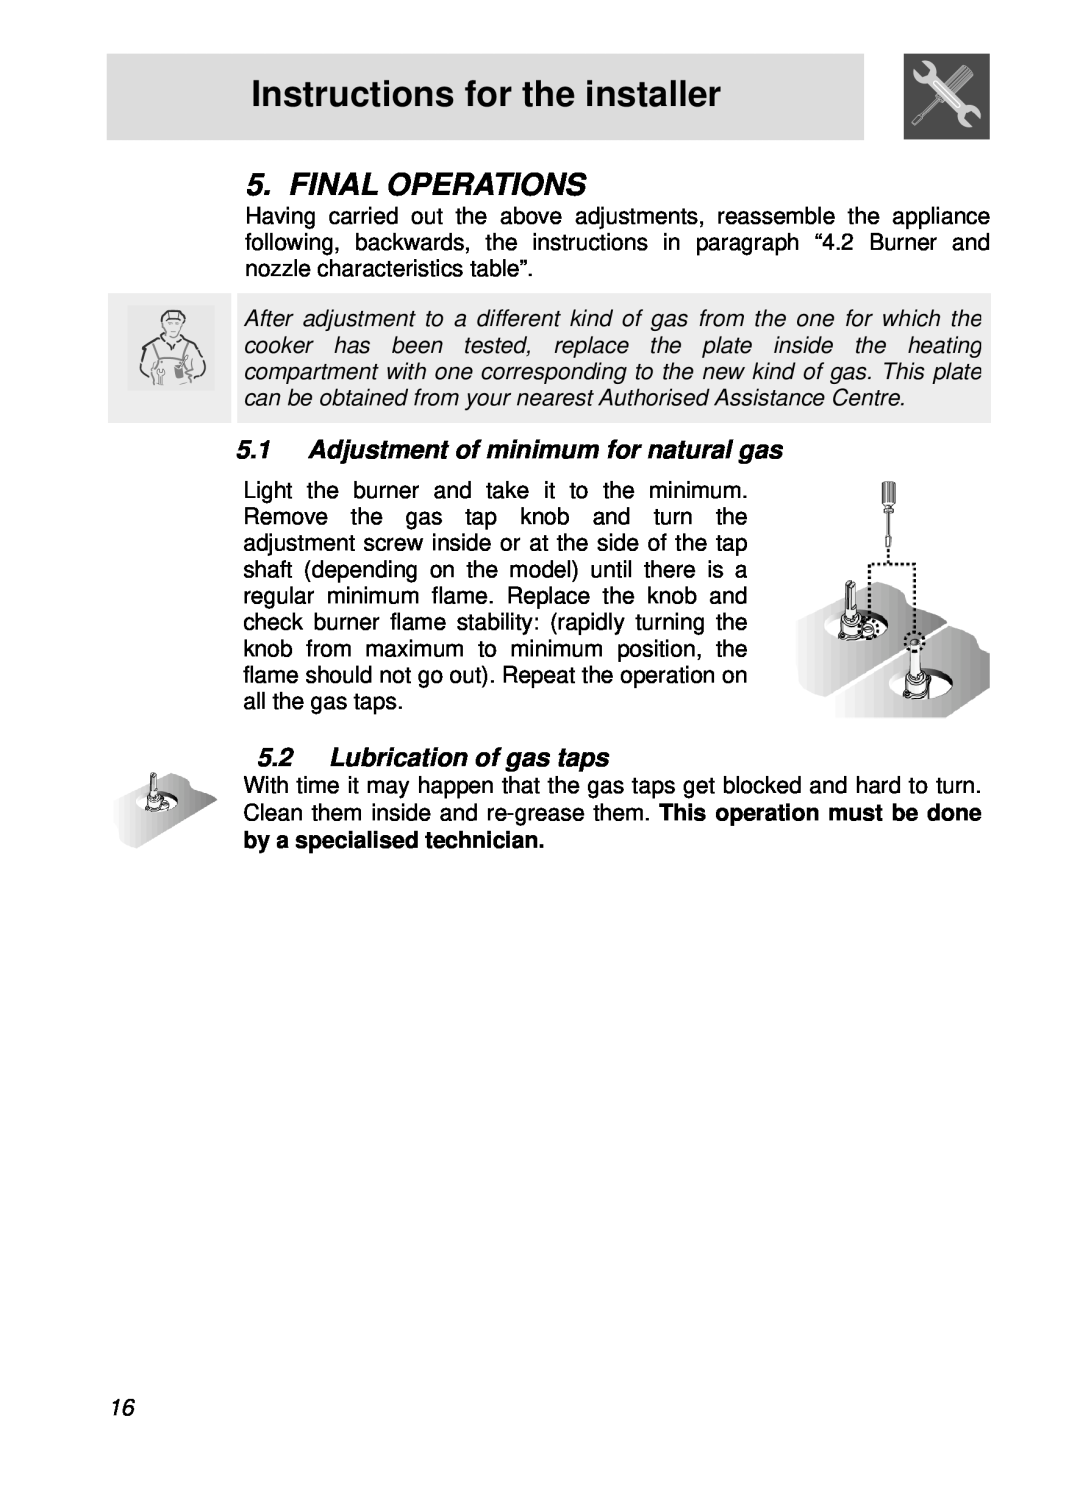 Smeg PGFA95F-1 manual Final Operations, 5.1Adjustment of minimum for natural gas, 5.2Lubrication of gas taps 